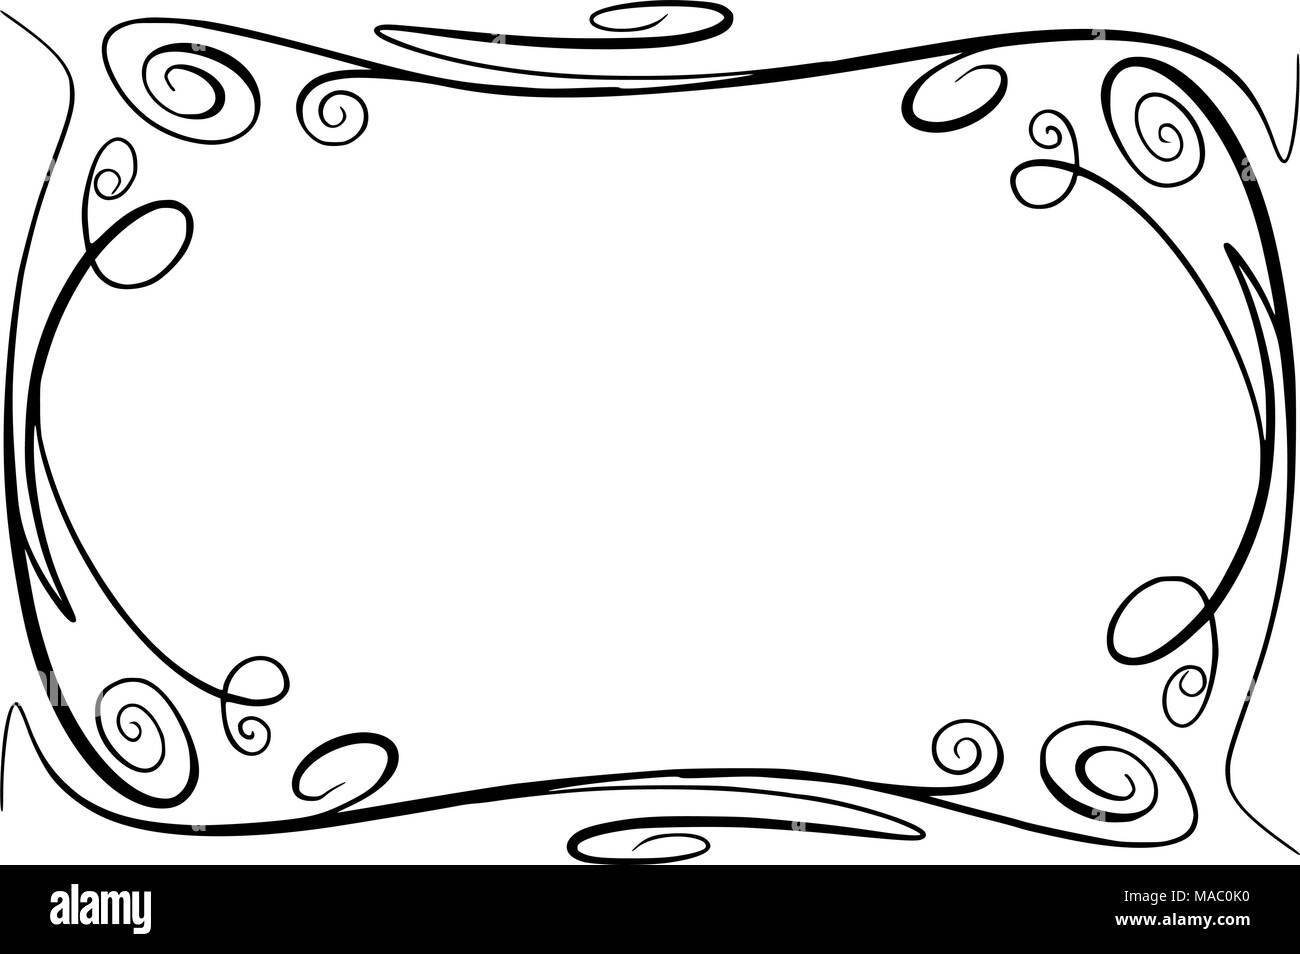 Flourish Vector Frame. Rectangle with squiggles, twirls and embellishments for image and text elements. Hand drawn black highlighting curlicue border isolated on the white background. Doodle effect. Pencil marks. Cartoon style. Geometric shapes for your design. Sketch look Stock Vector